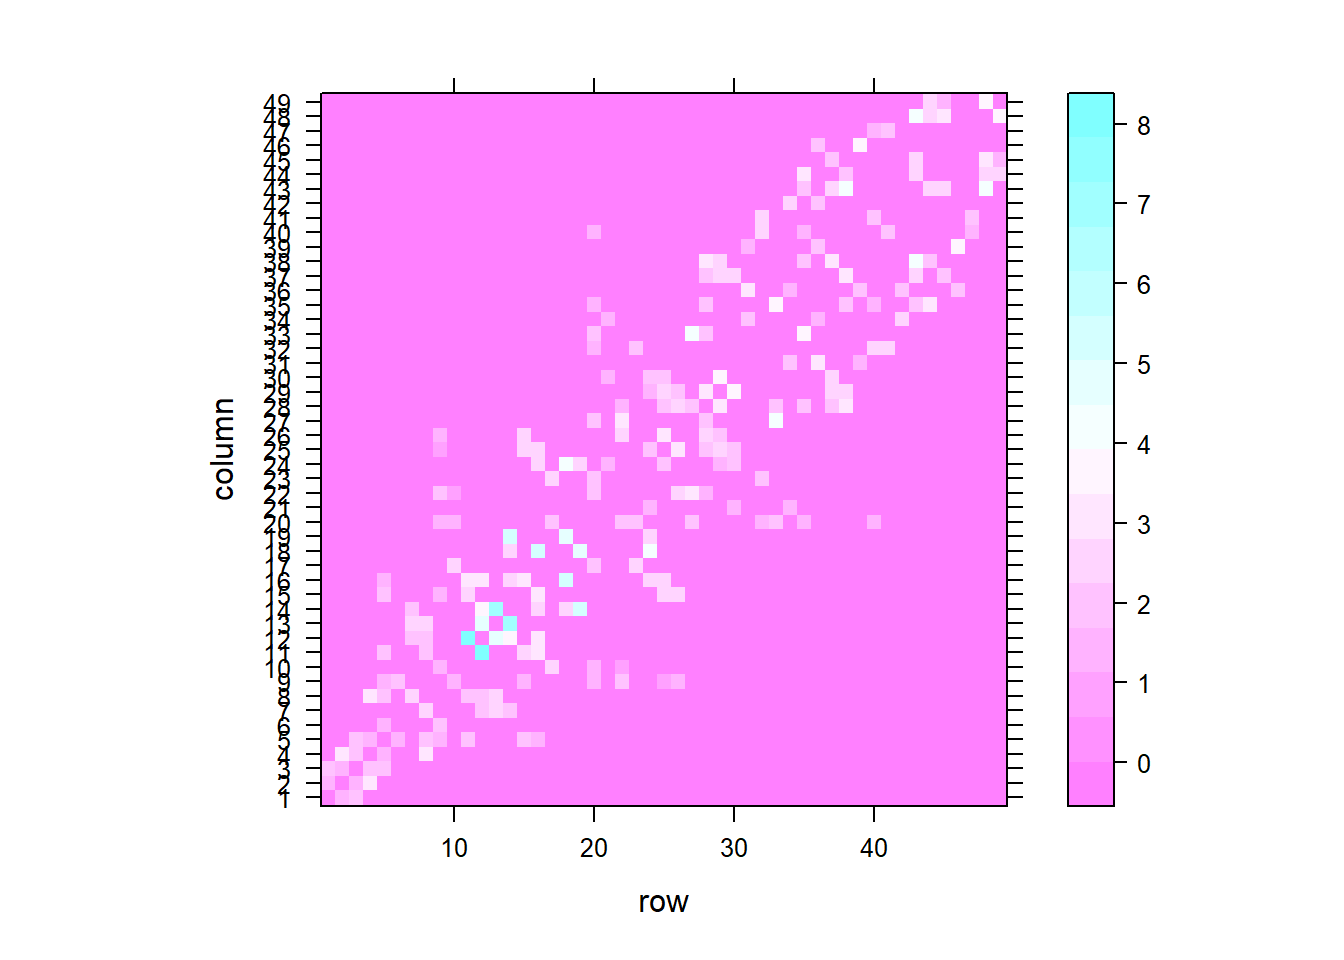 Spatial weights matrix based on binary neighbor list (left), and inverse distance values (right).